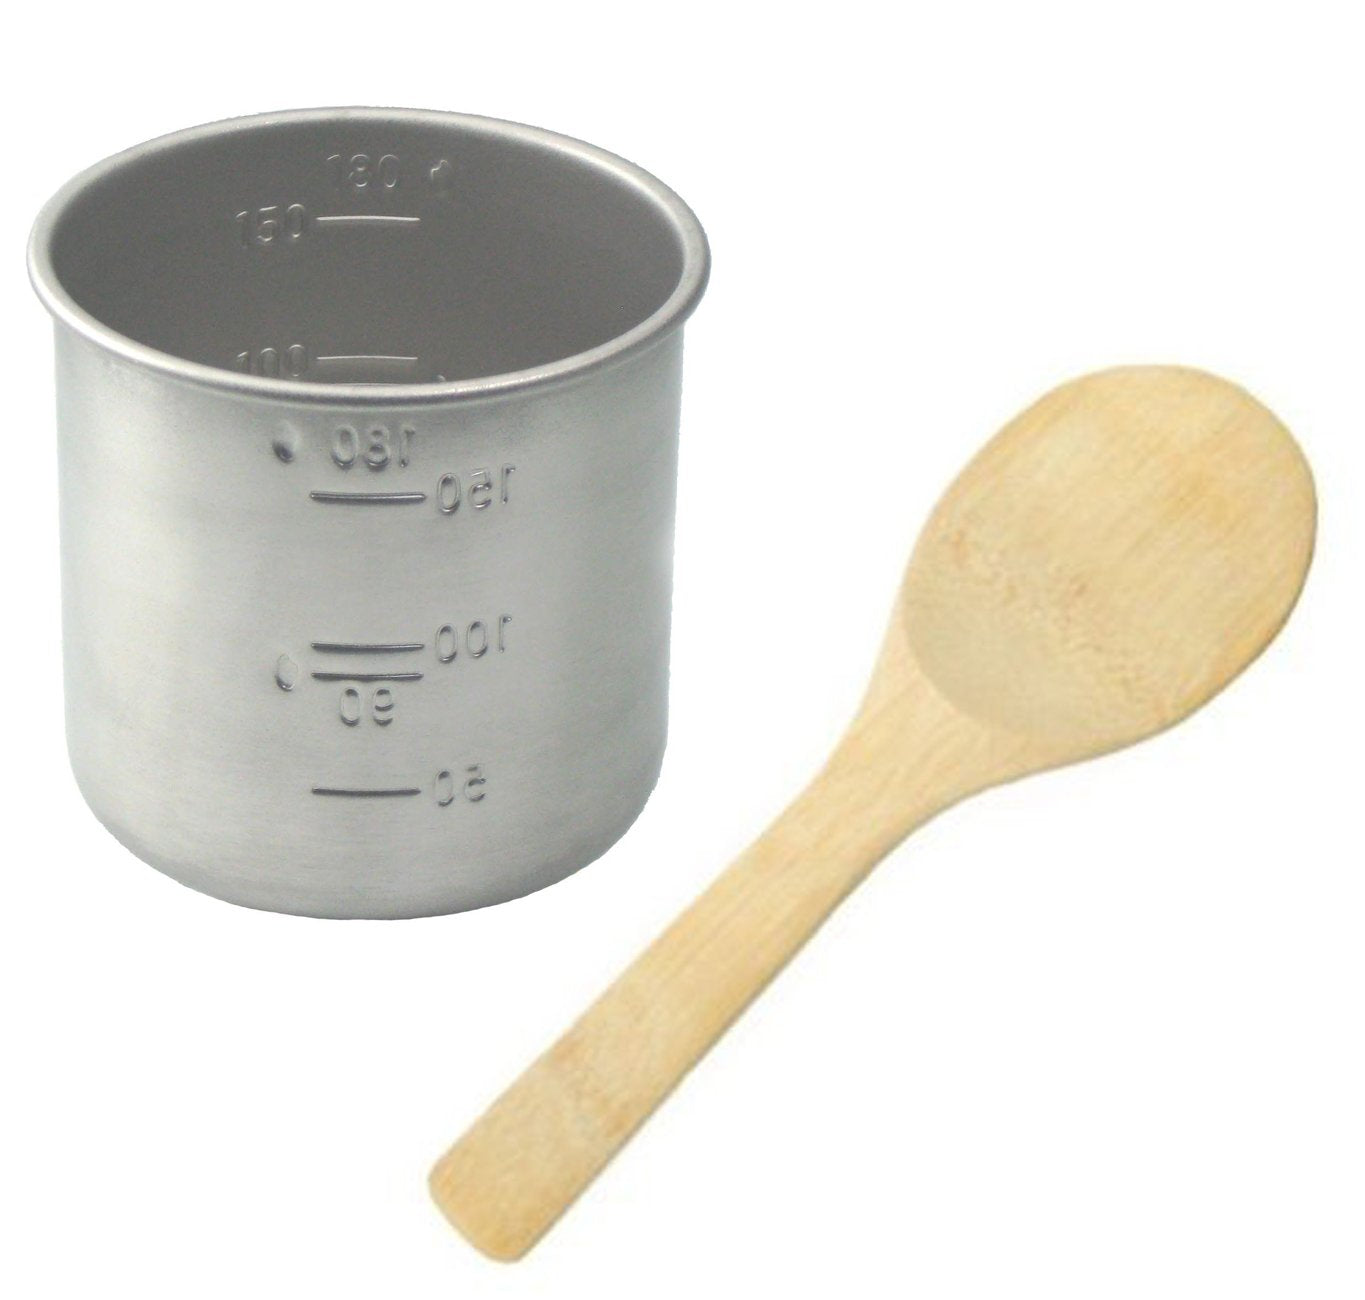 Stainless Steel Rice Measuring Cup + Rice Paddle Scoop Spatula Bamboo - Replacement for Japanese Electric Rice Cooker (1 Rice Cup + 1 Paddle)